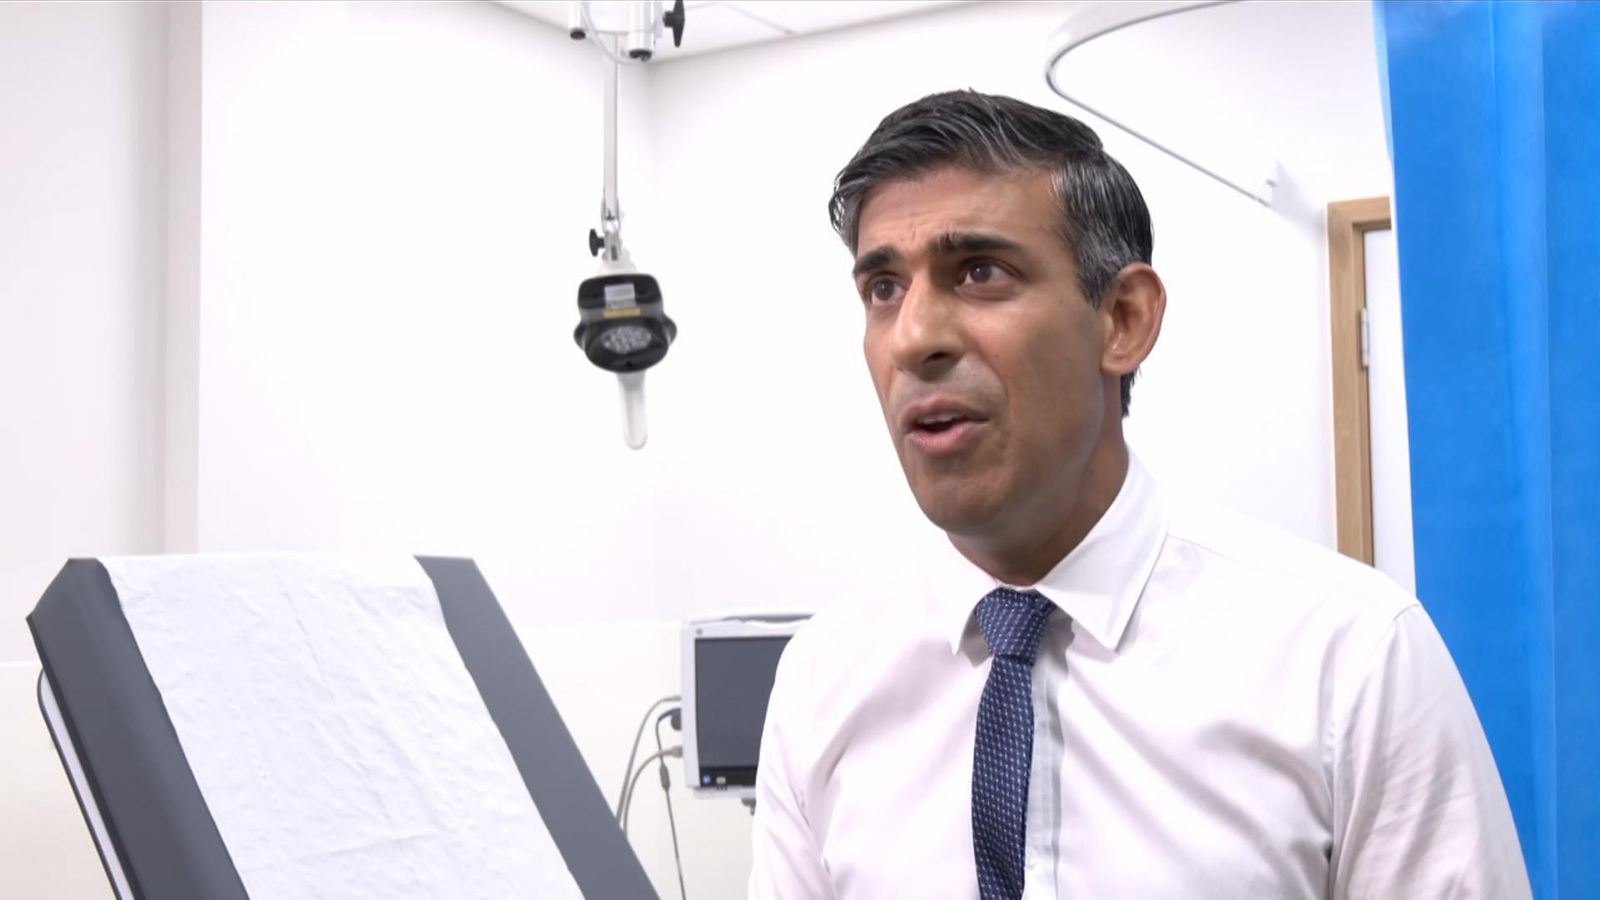 Bibby Stockholm: Rishi Sunak refuses to say if he was informed about potential health risks 